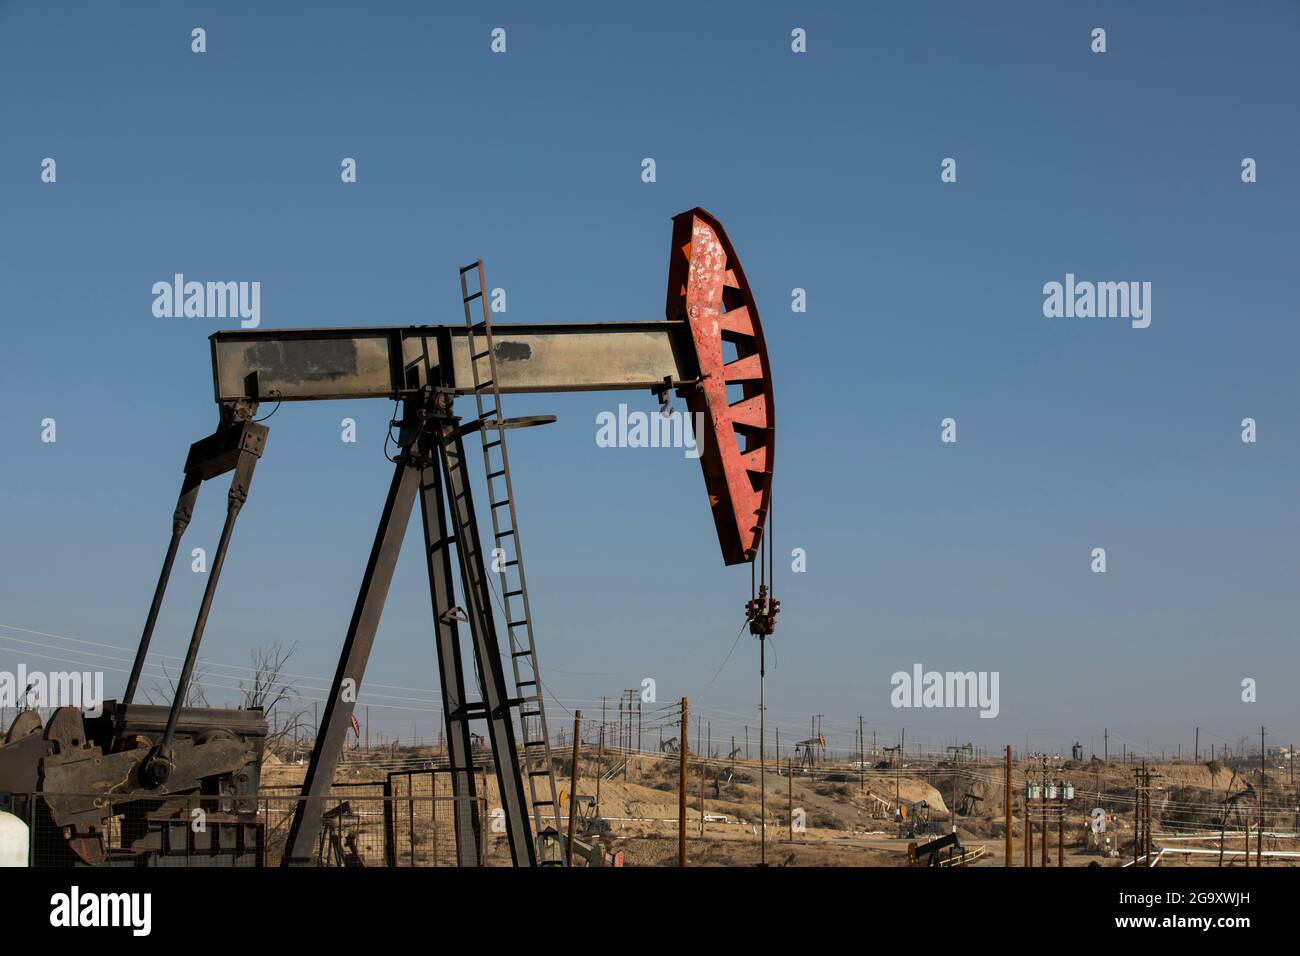 Daytime view of crude oil extraction in Bakersfield, California, USA. Stock Photo